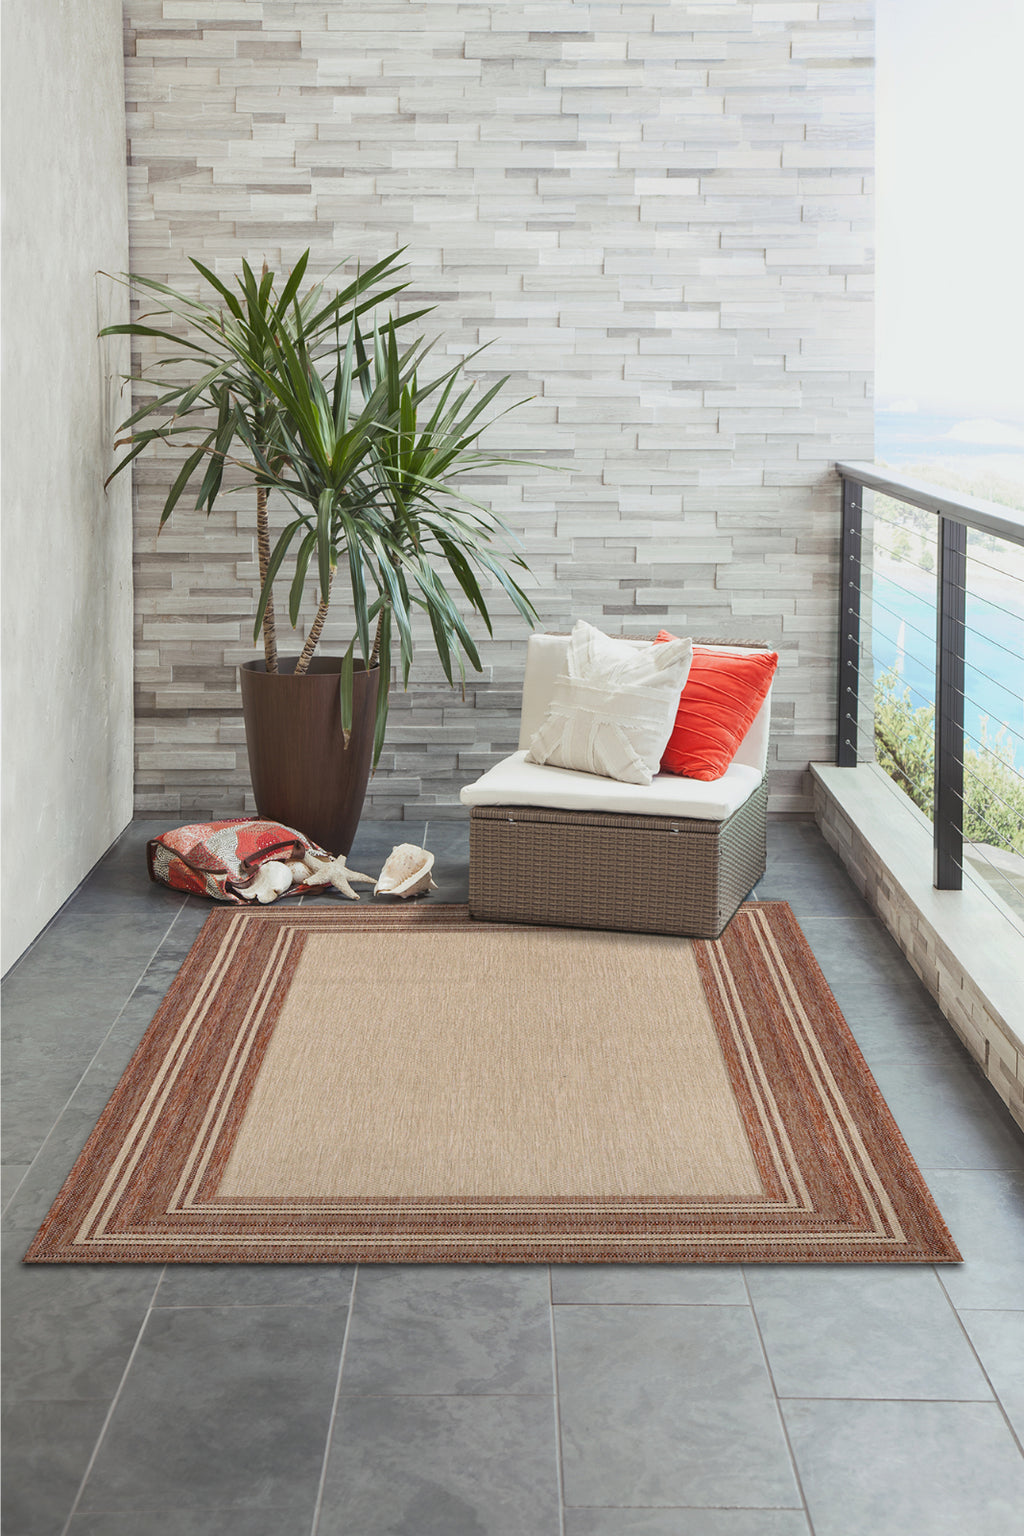 Trans Ocean Carmel 8425/24 Multi Border Red Area Rug by Liora Manne Room Scene Image Feature